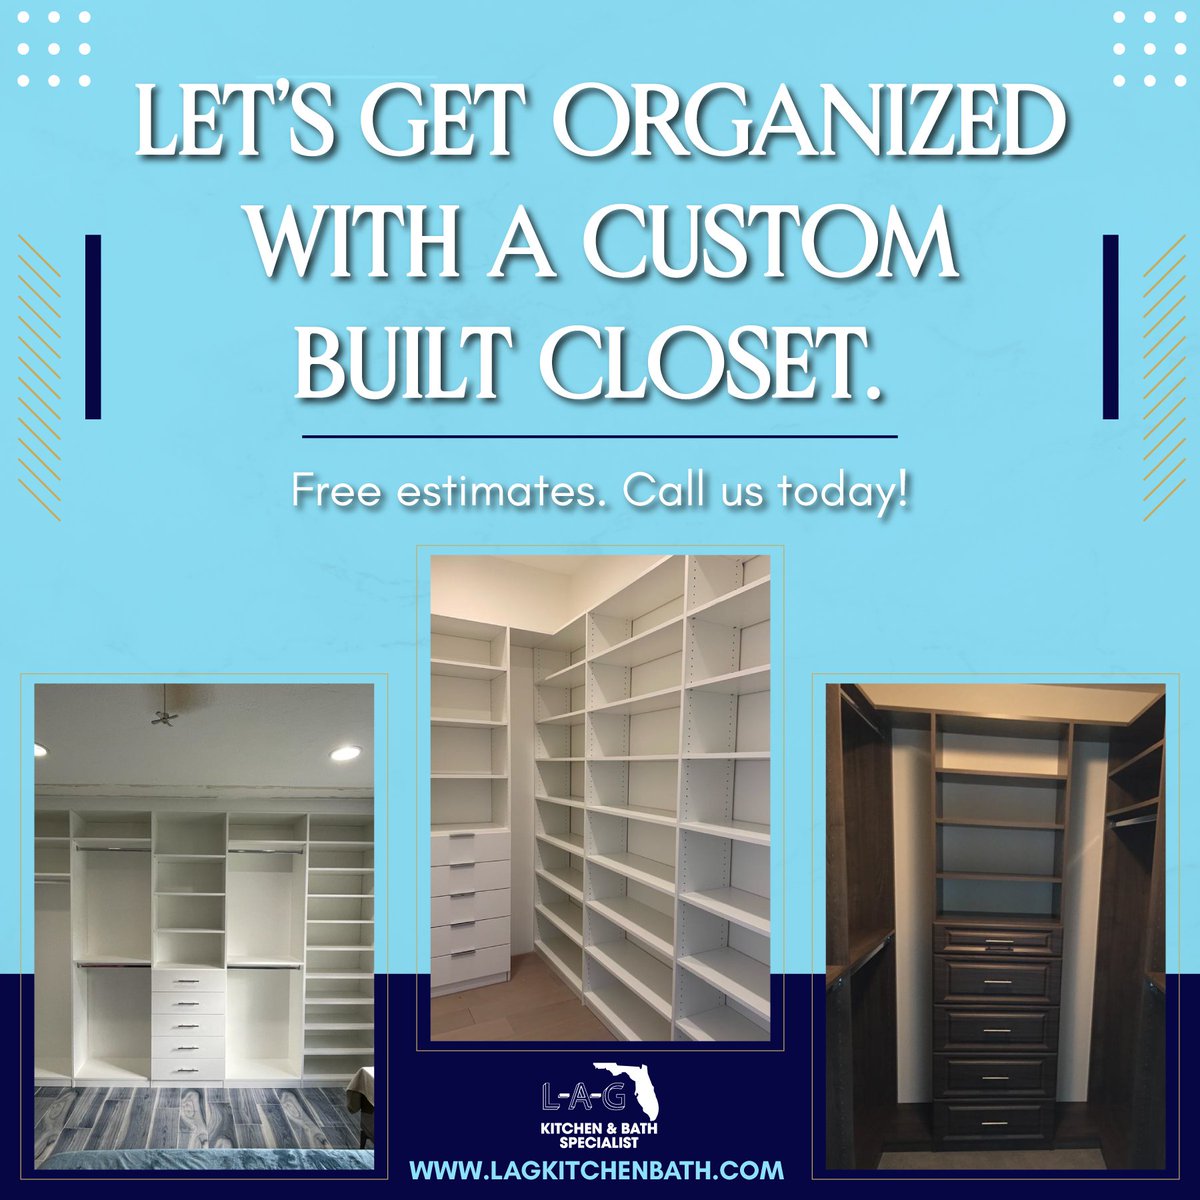 Custom is always better! It's time to get organized with a custom built closet to fit your lifestyle perfectly. 

We offer free estimates! 

Make an appointment with us today! Dm or call us. 🤩

#closets #closetorganization #customclosets #custombuilt #closetdesign #delraybeachfl